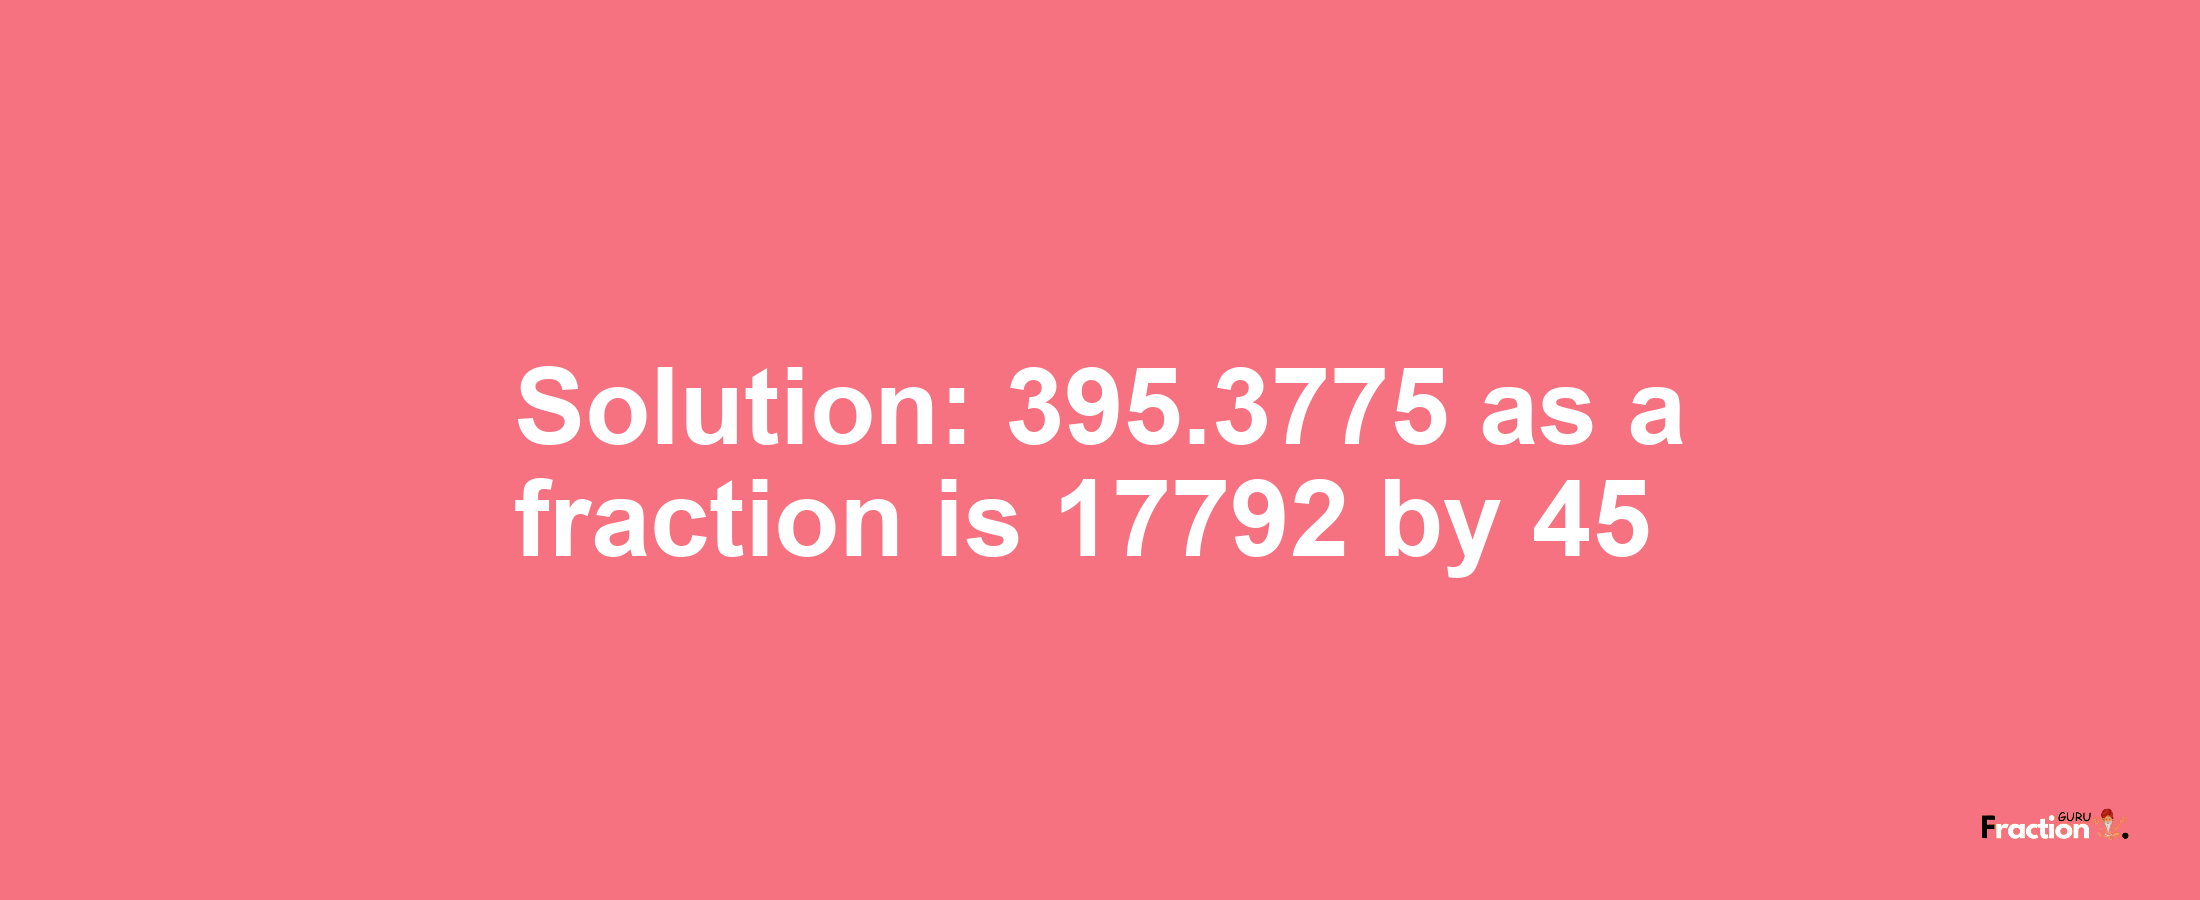 Solution:395.3775 as a fraction is 17792/45